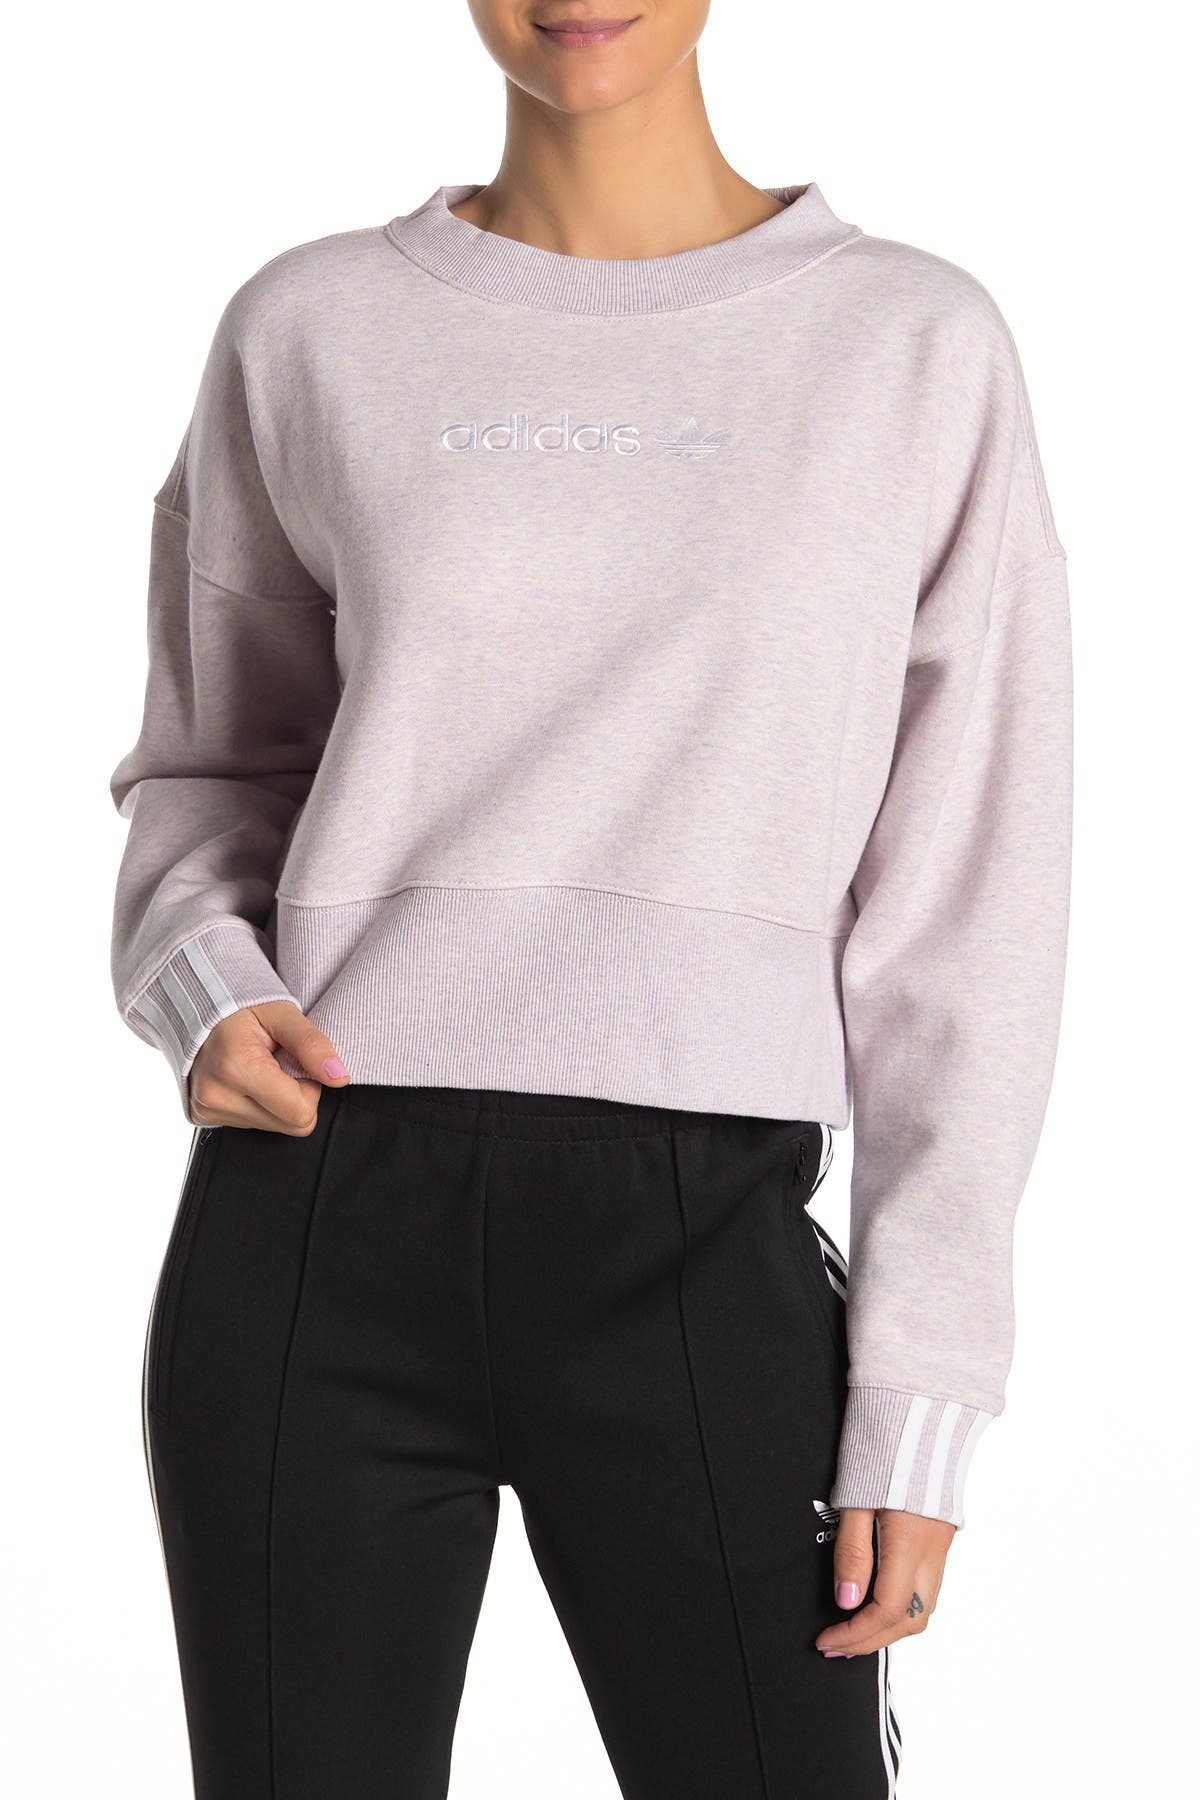 adidas | Coeeze Cropped Pullover 